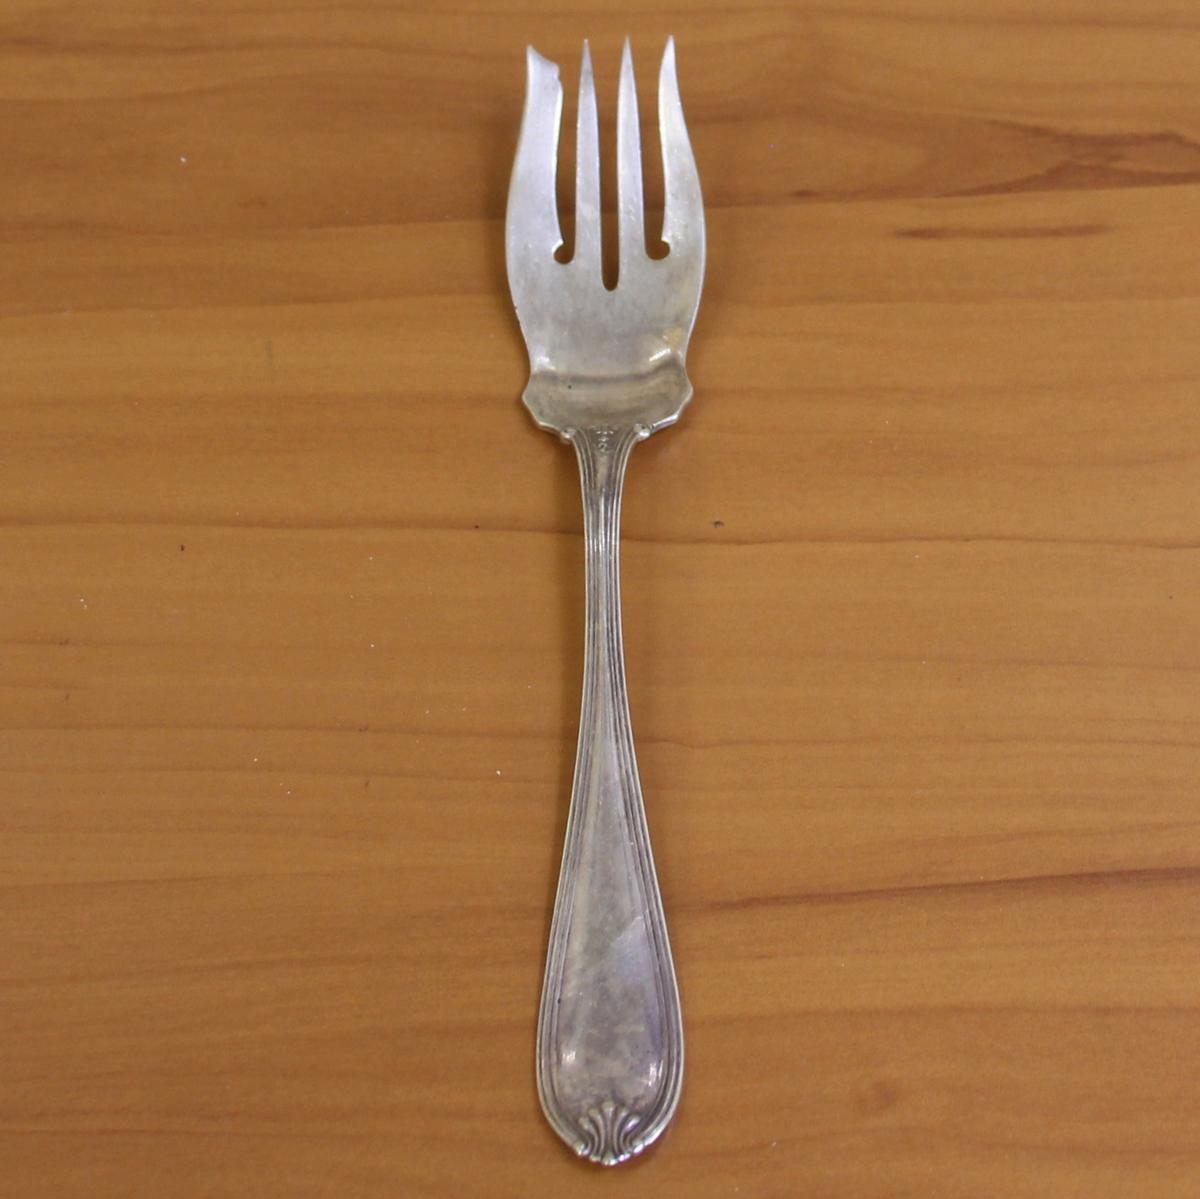 Simpson, Hall, Miller And Co. Cold Meat Fork In .925 Sterling Silver